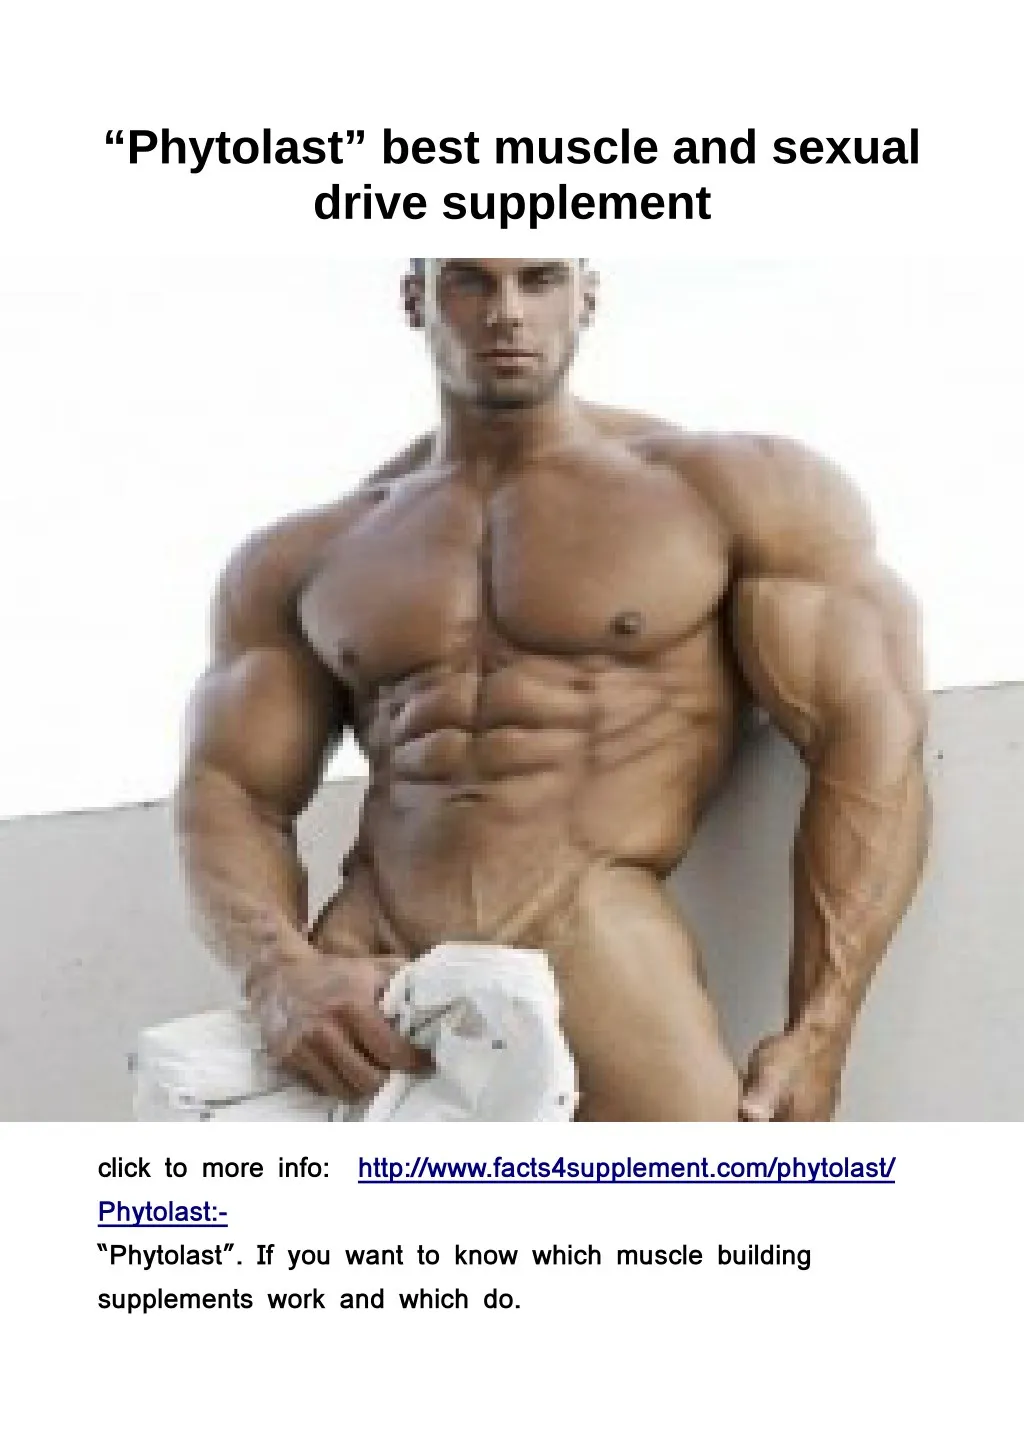 phytolast best muscle and sexual drive supplement